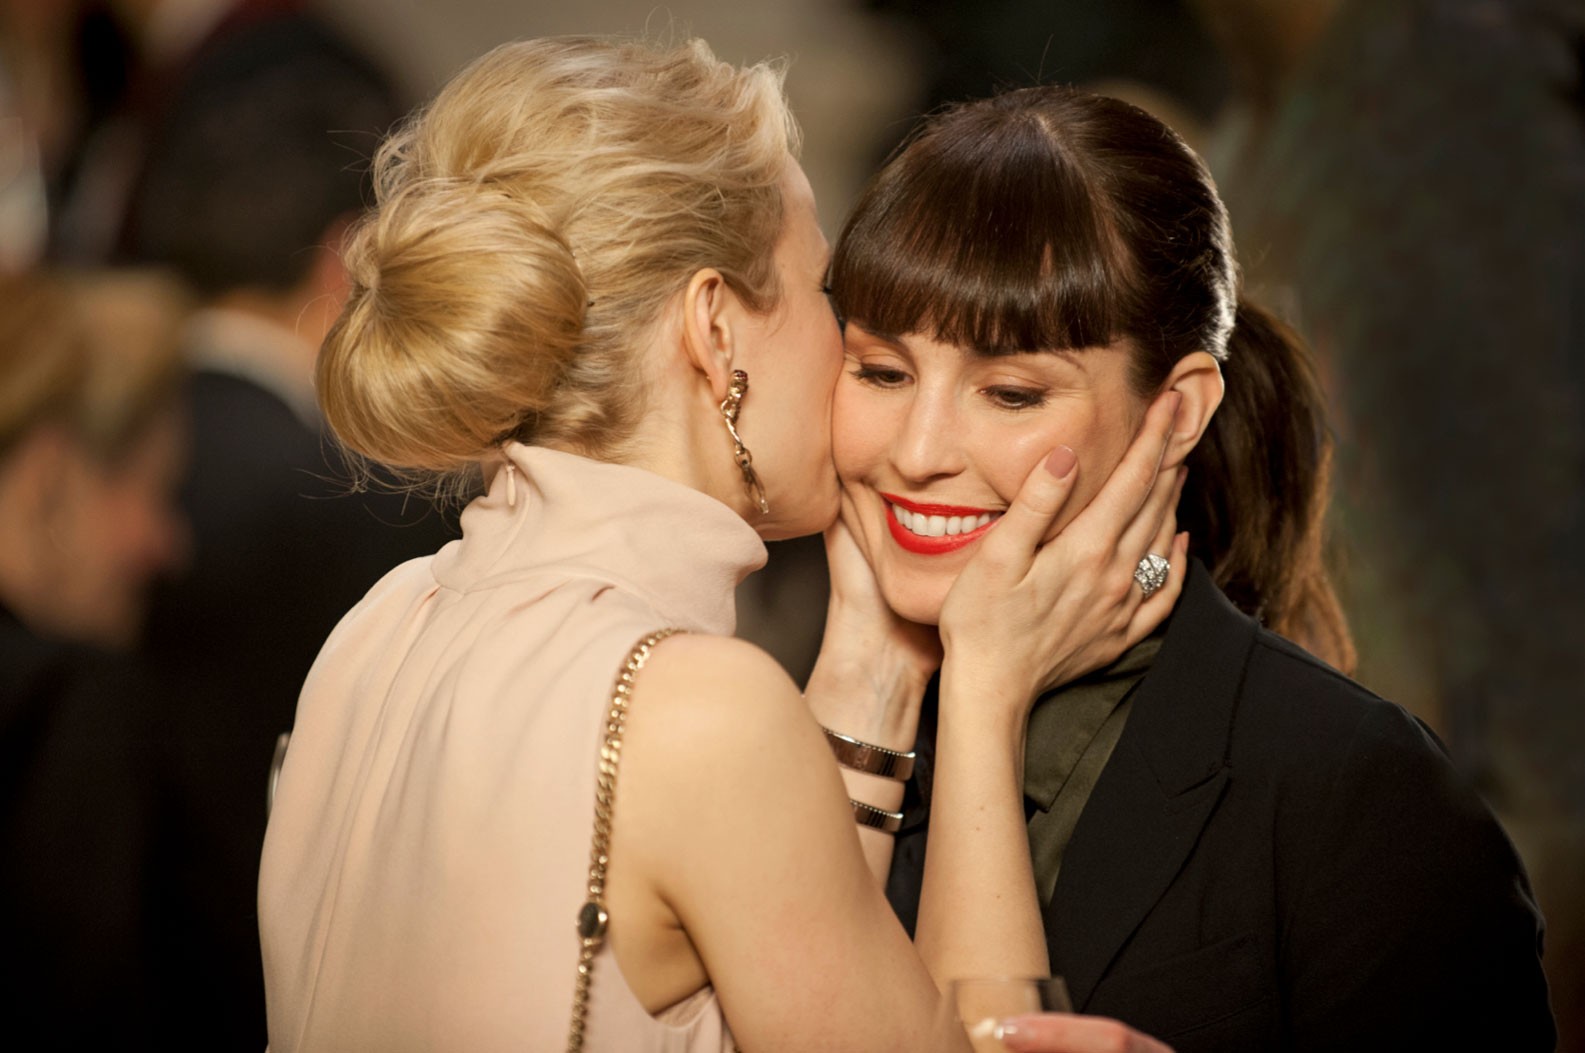 Rachel McAdams stars as Christine and Noomi Rapace stars as Isabelle James in Entertainment One's Passion (2013)